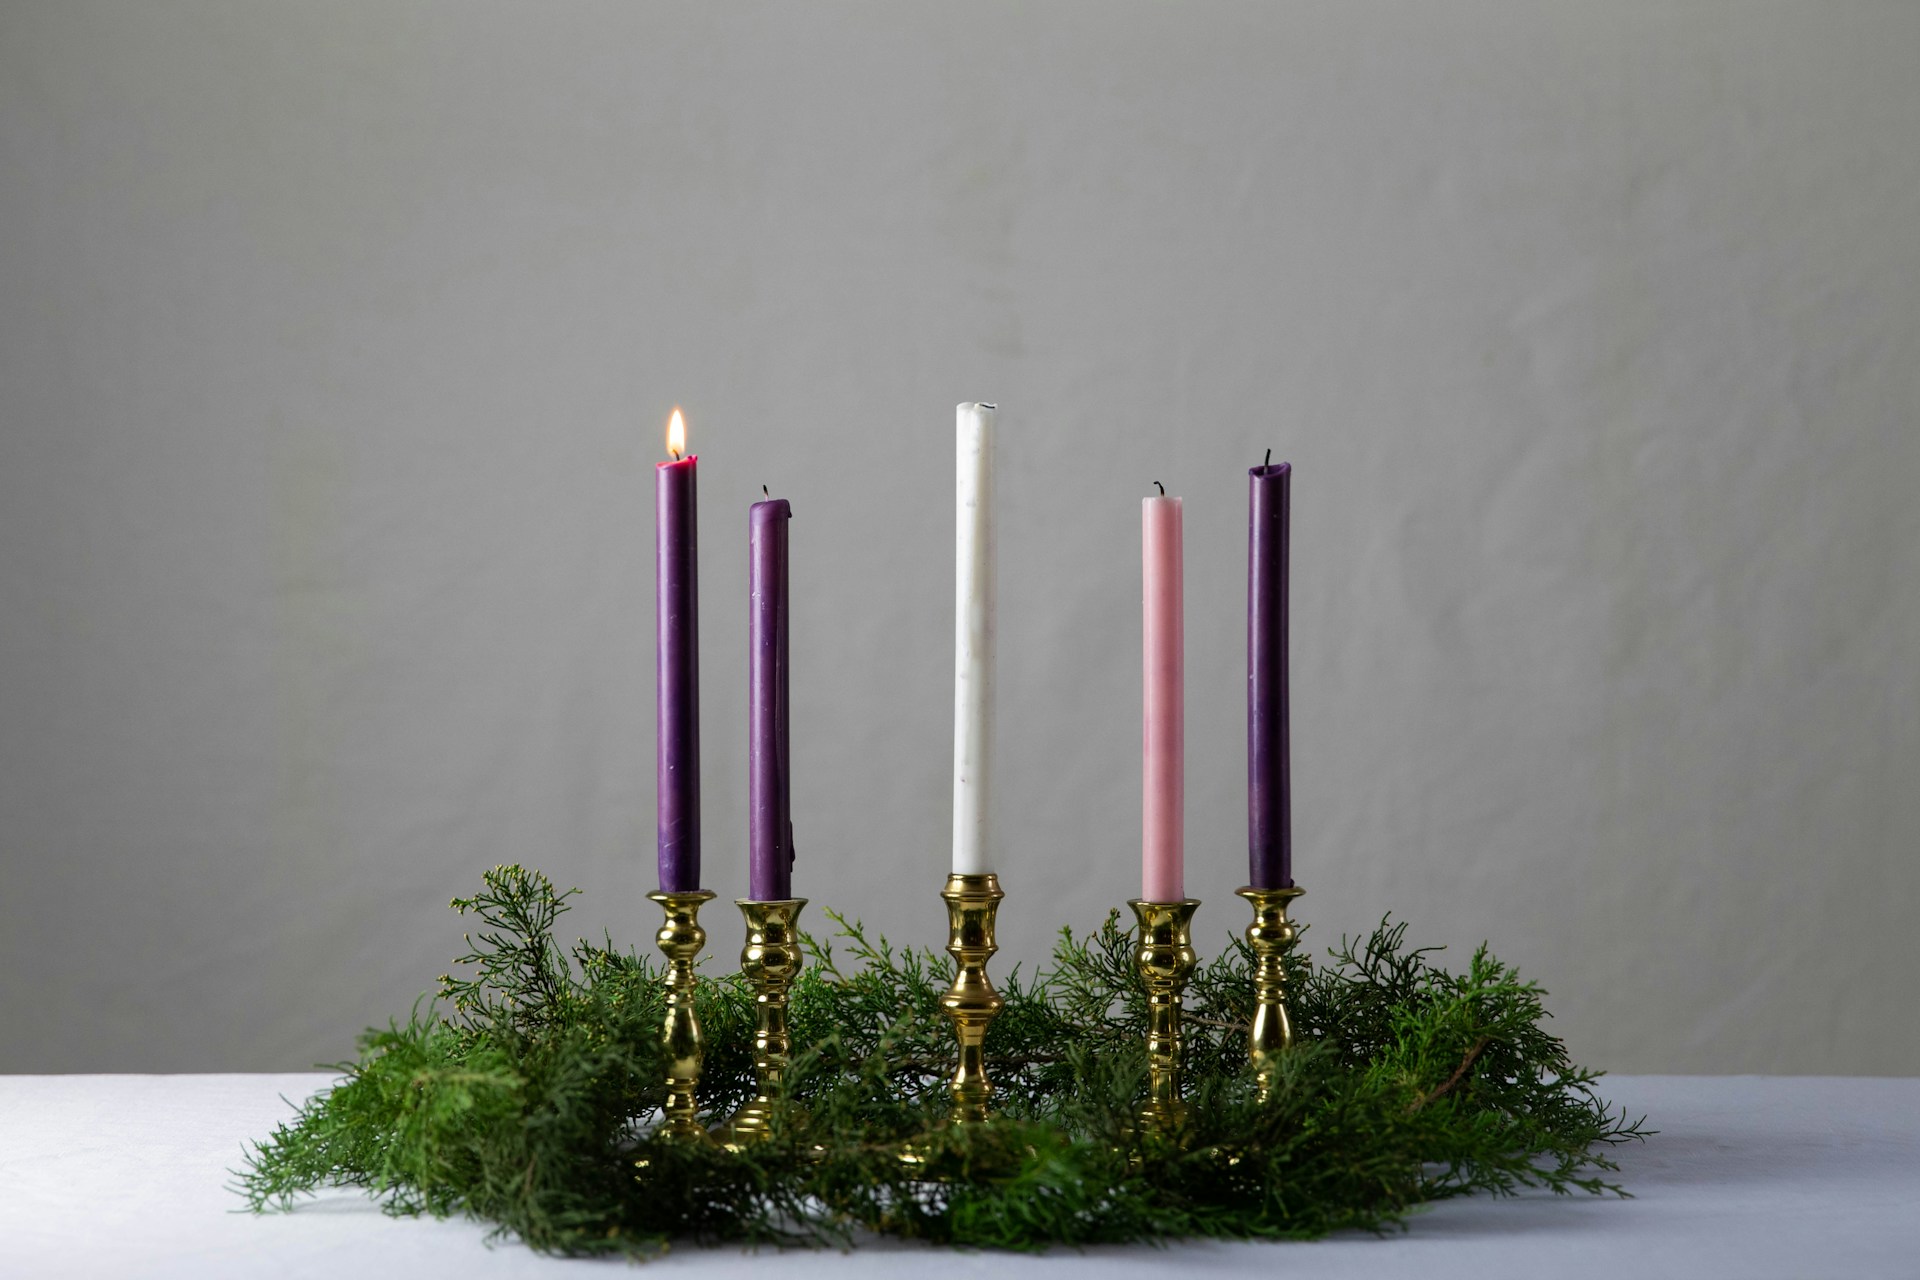 Newsletters for the First Sunday of Advent